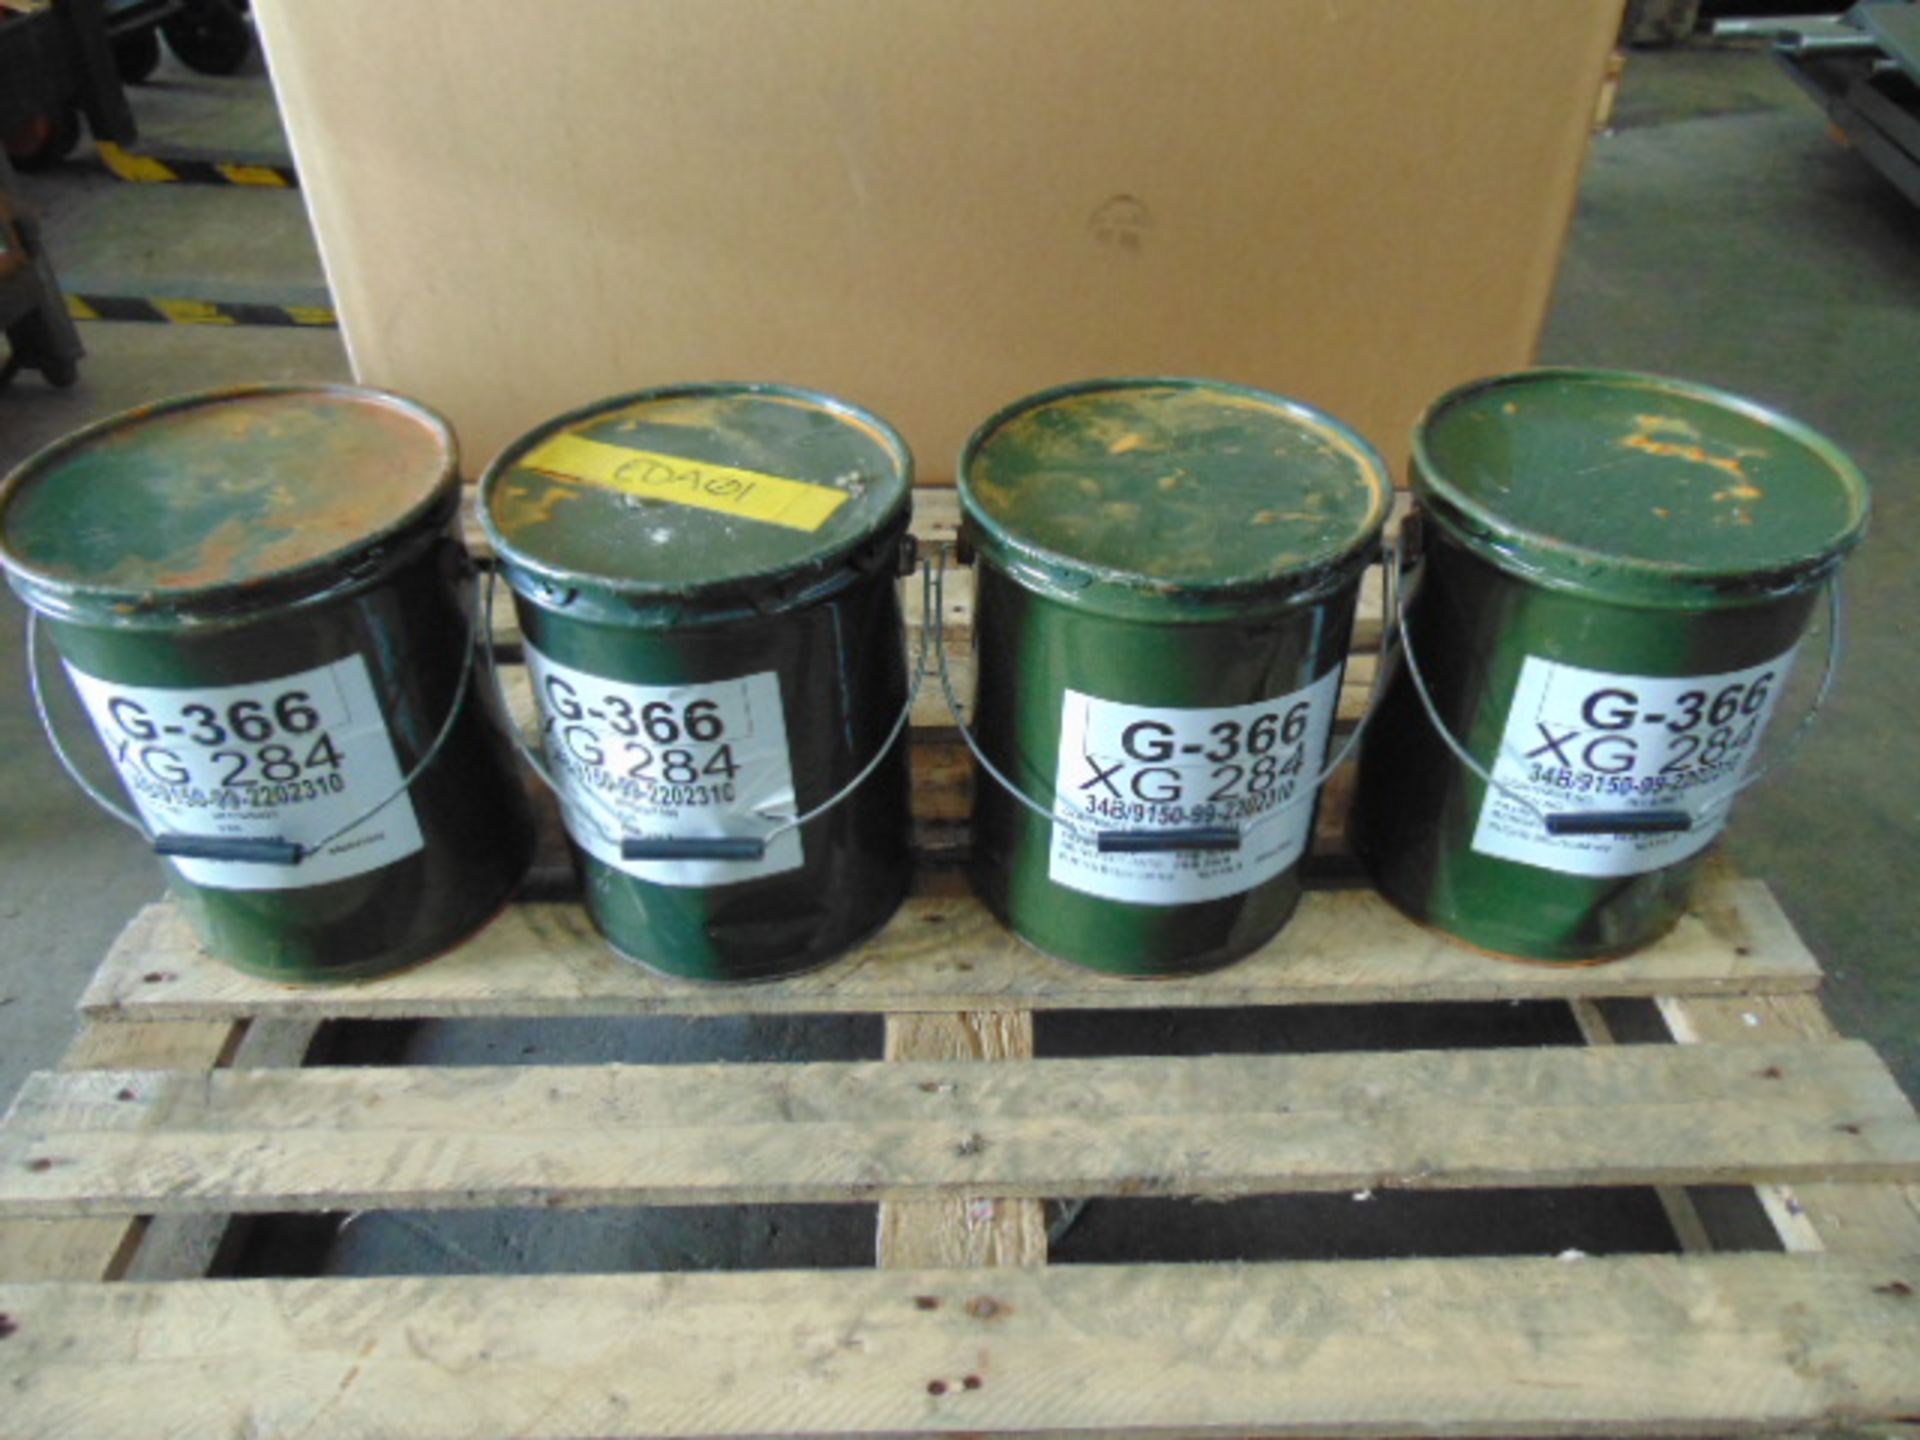 4 x Unissued 12.5Kg Tins of XG-284 G-366 Grease